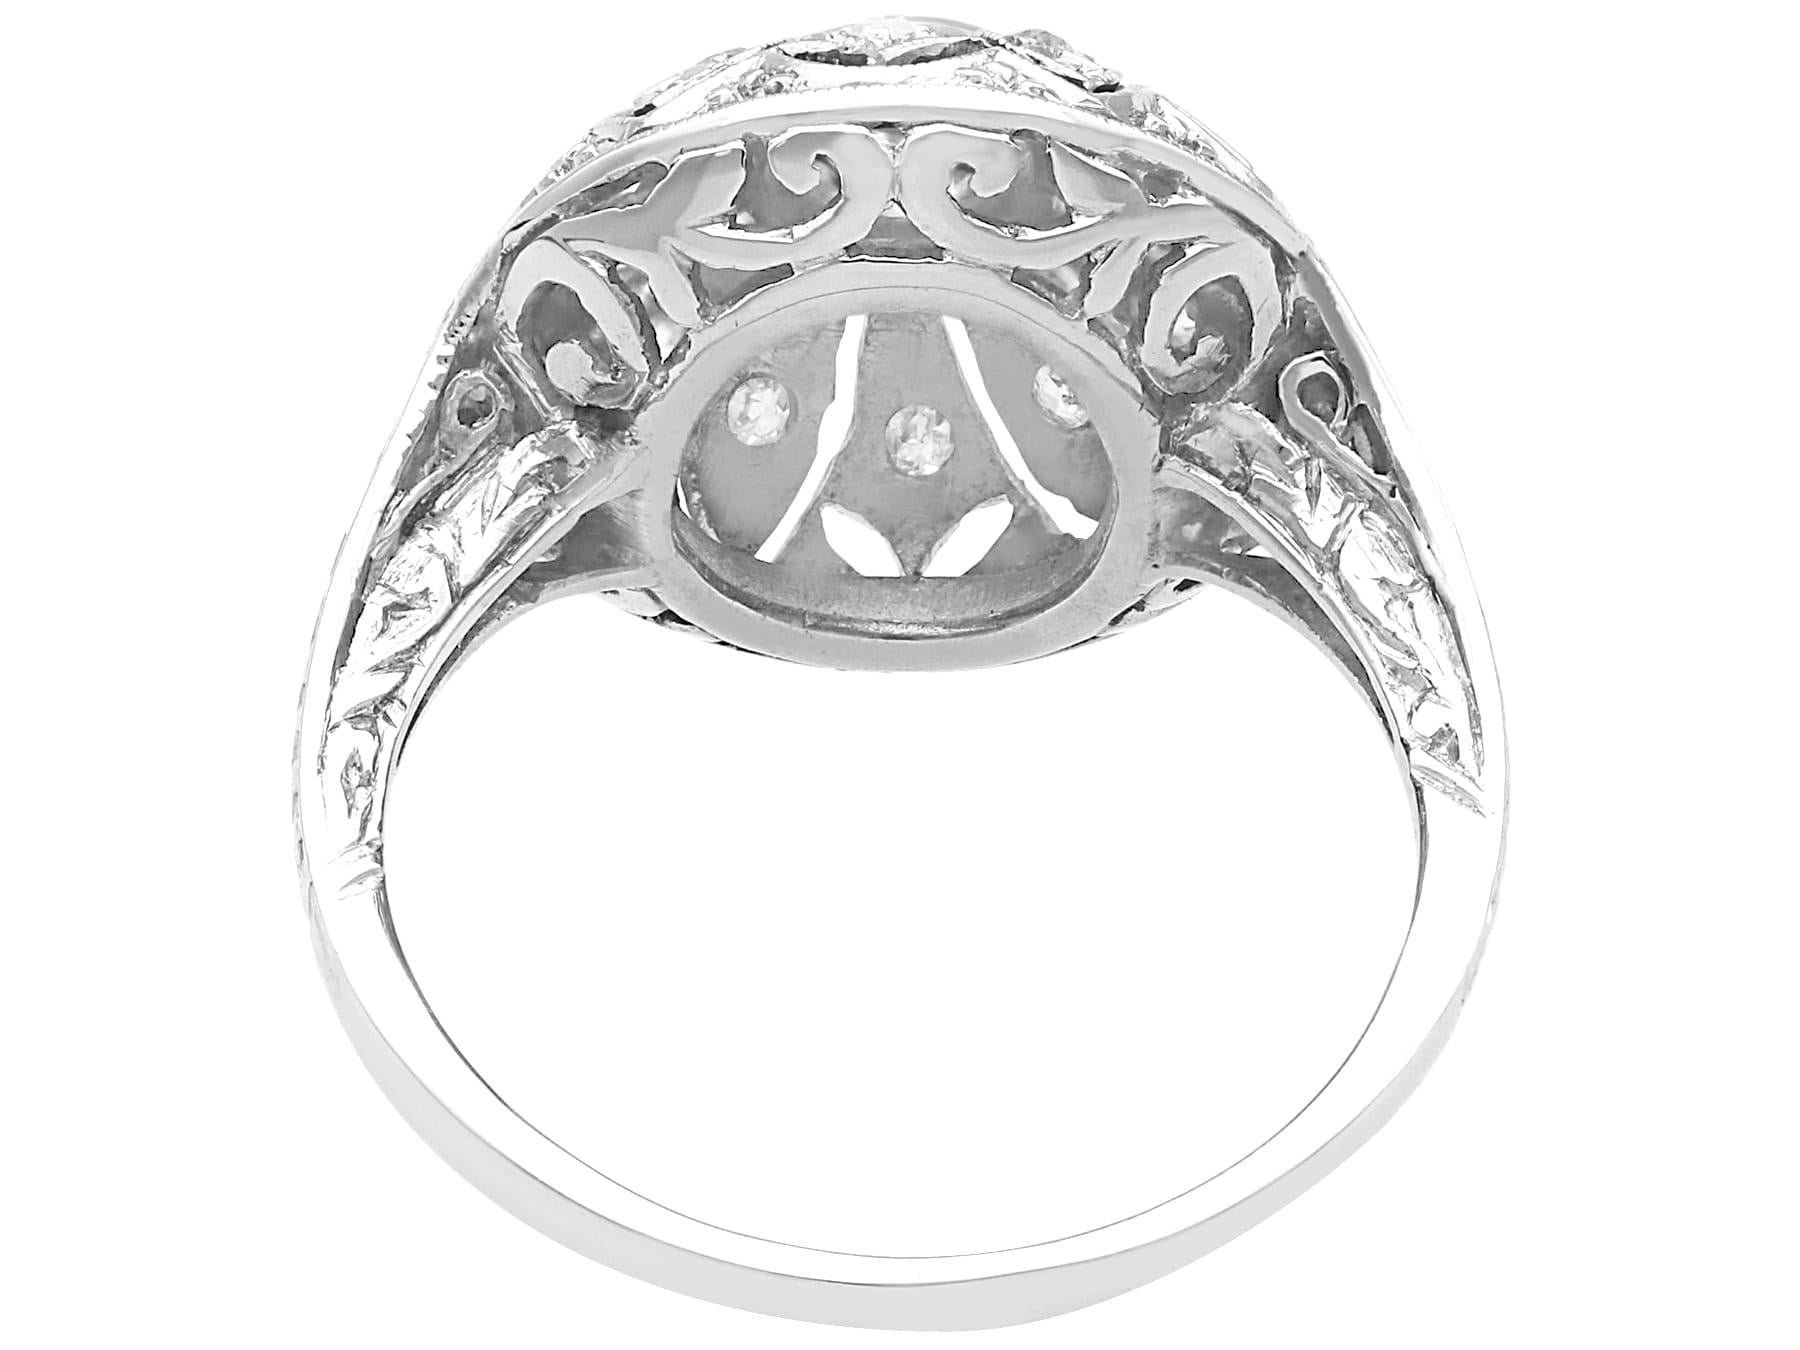 Women's or Men's Antique 1920s 0.57 Carat Diamond and 14k White Gold Art Deco Cocktail Ring  For Sale